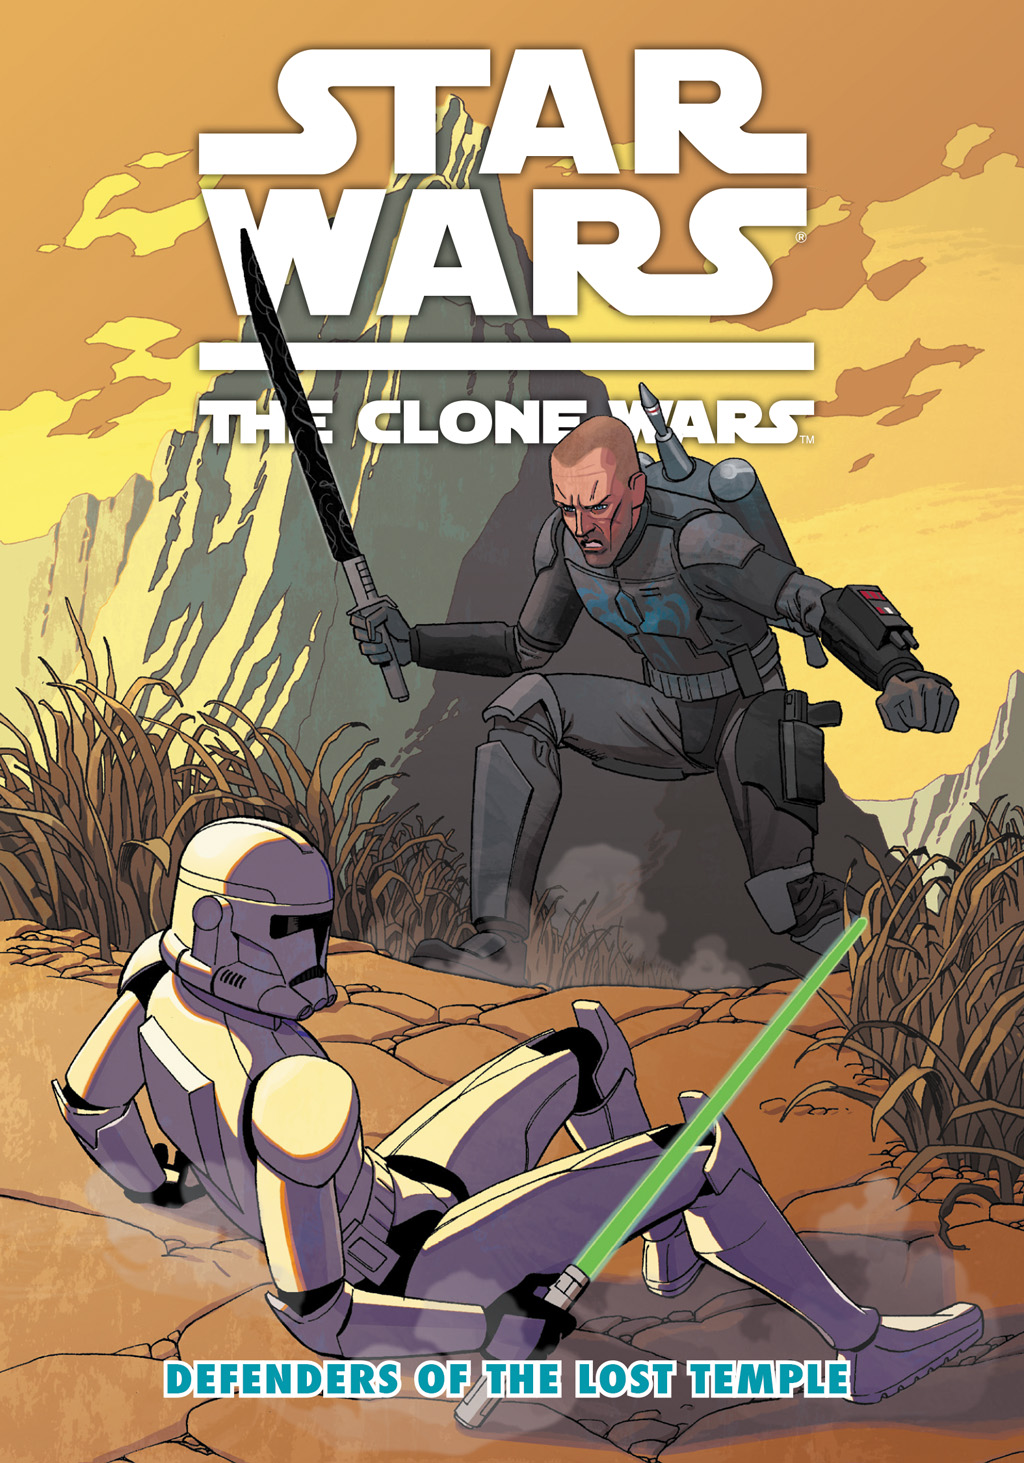 Read online Star Wars: The Clone Wars - Defenders of the Lost Temple comic -  Issue # Full - 1